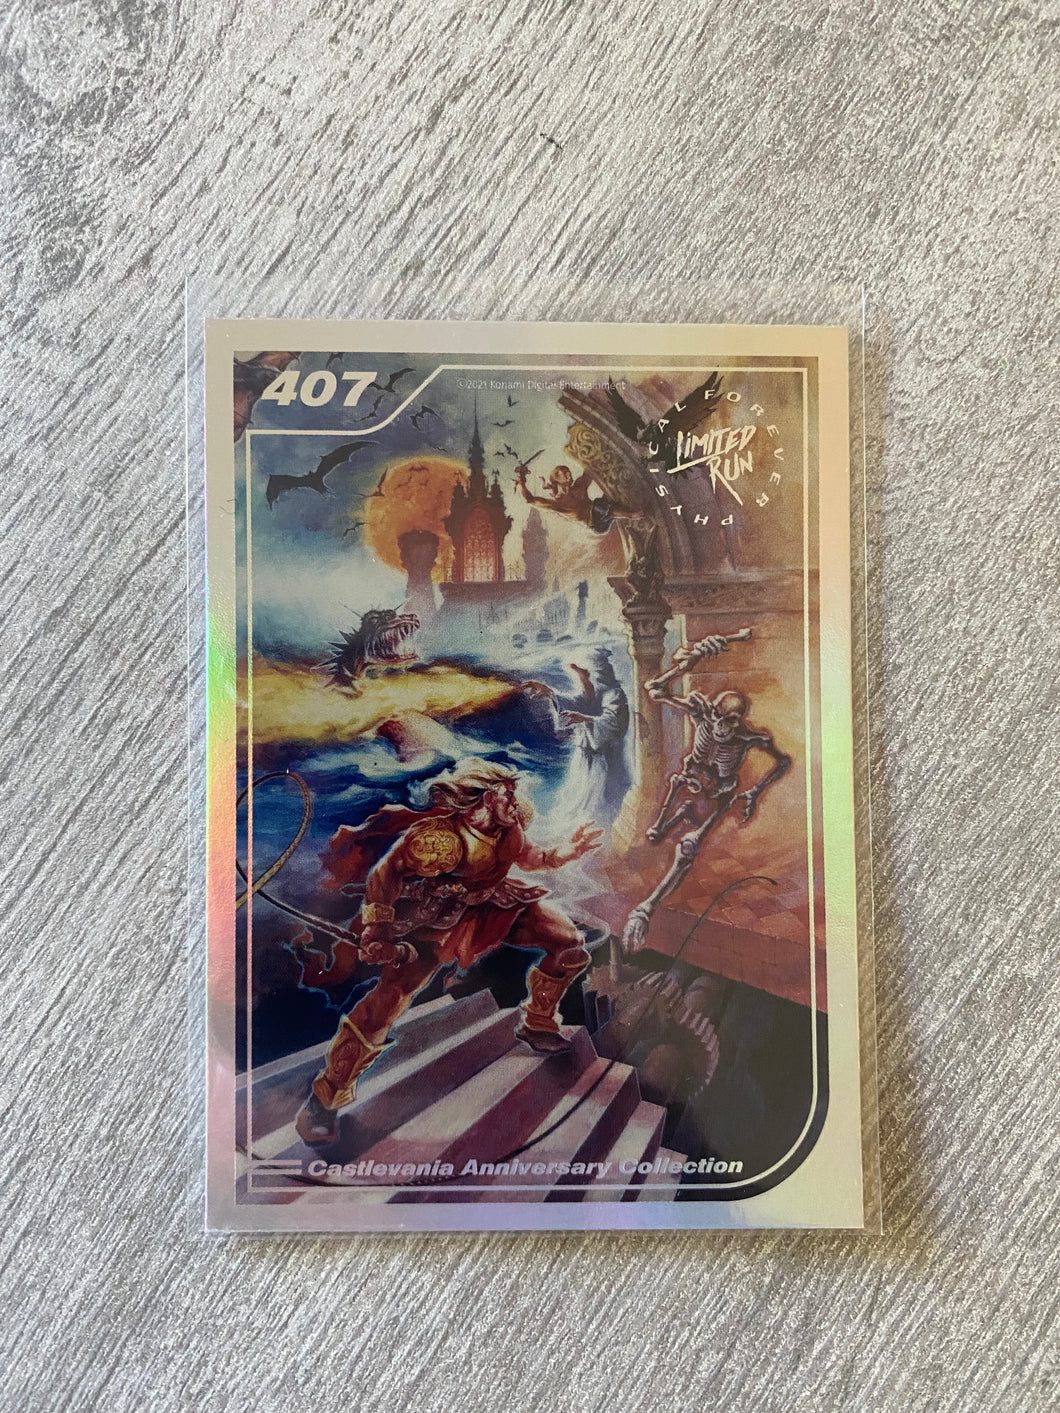 Gen2 #407 Silver Castlevania Anniversary collection Limited run games Trading card